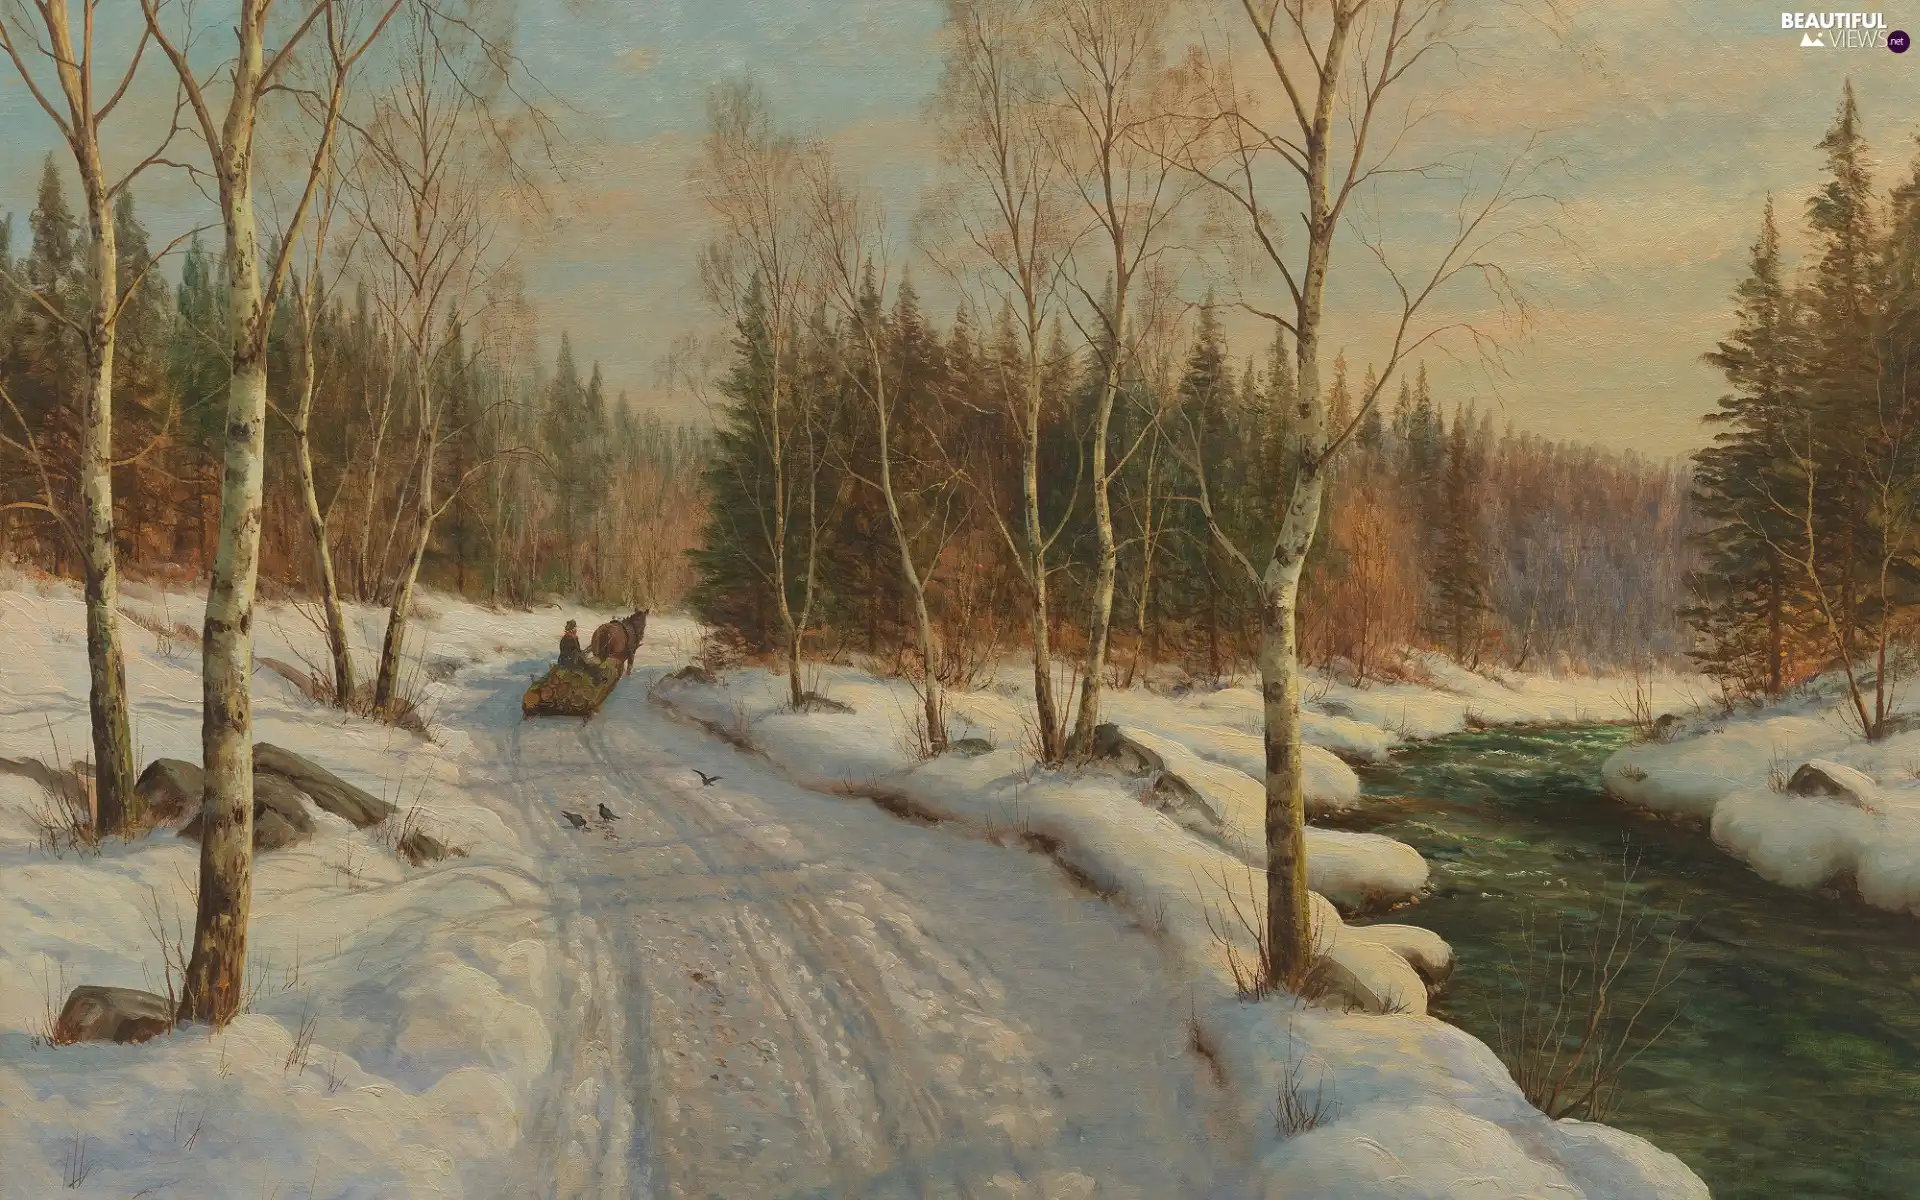 Horse, Way, sleigh, birds, River, trees, picture, viewes, winter, birch, forest, Peder Monsted, Human, painting, Spruces